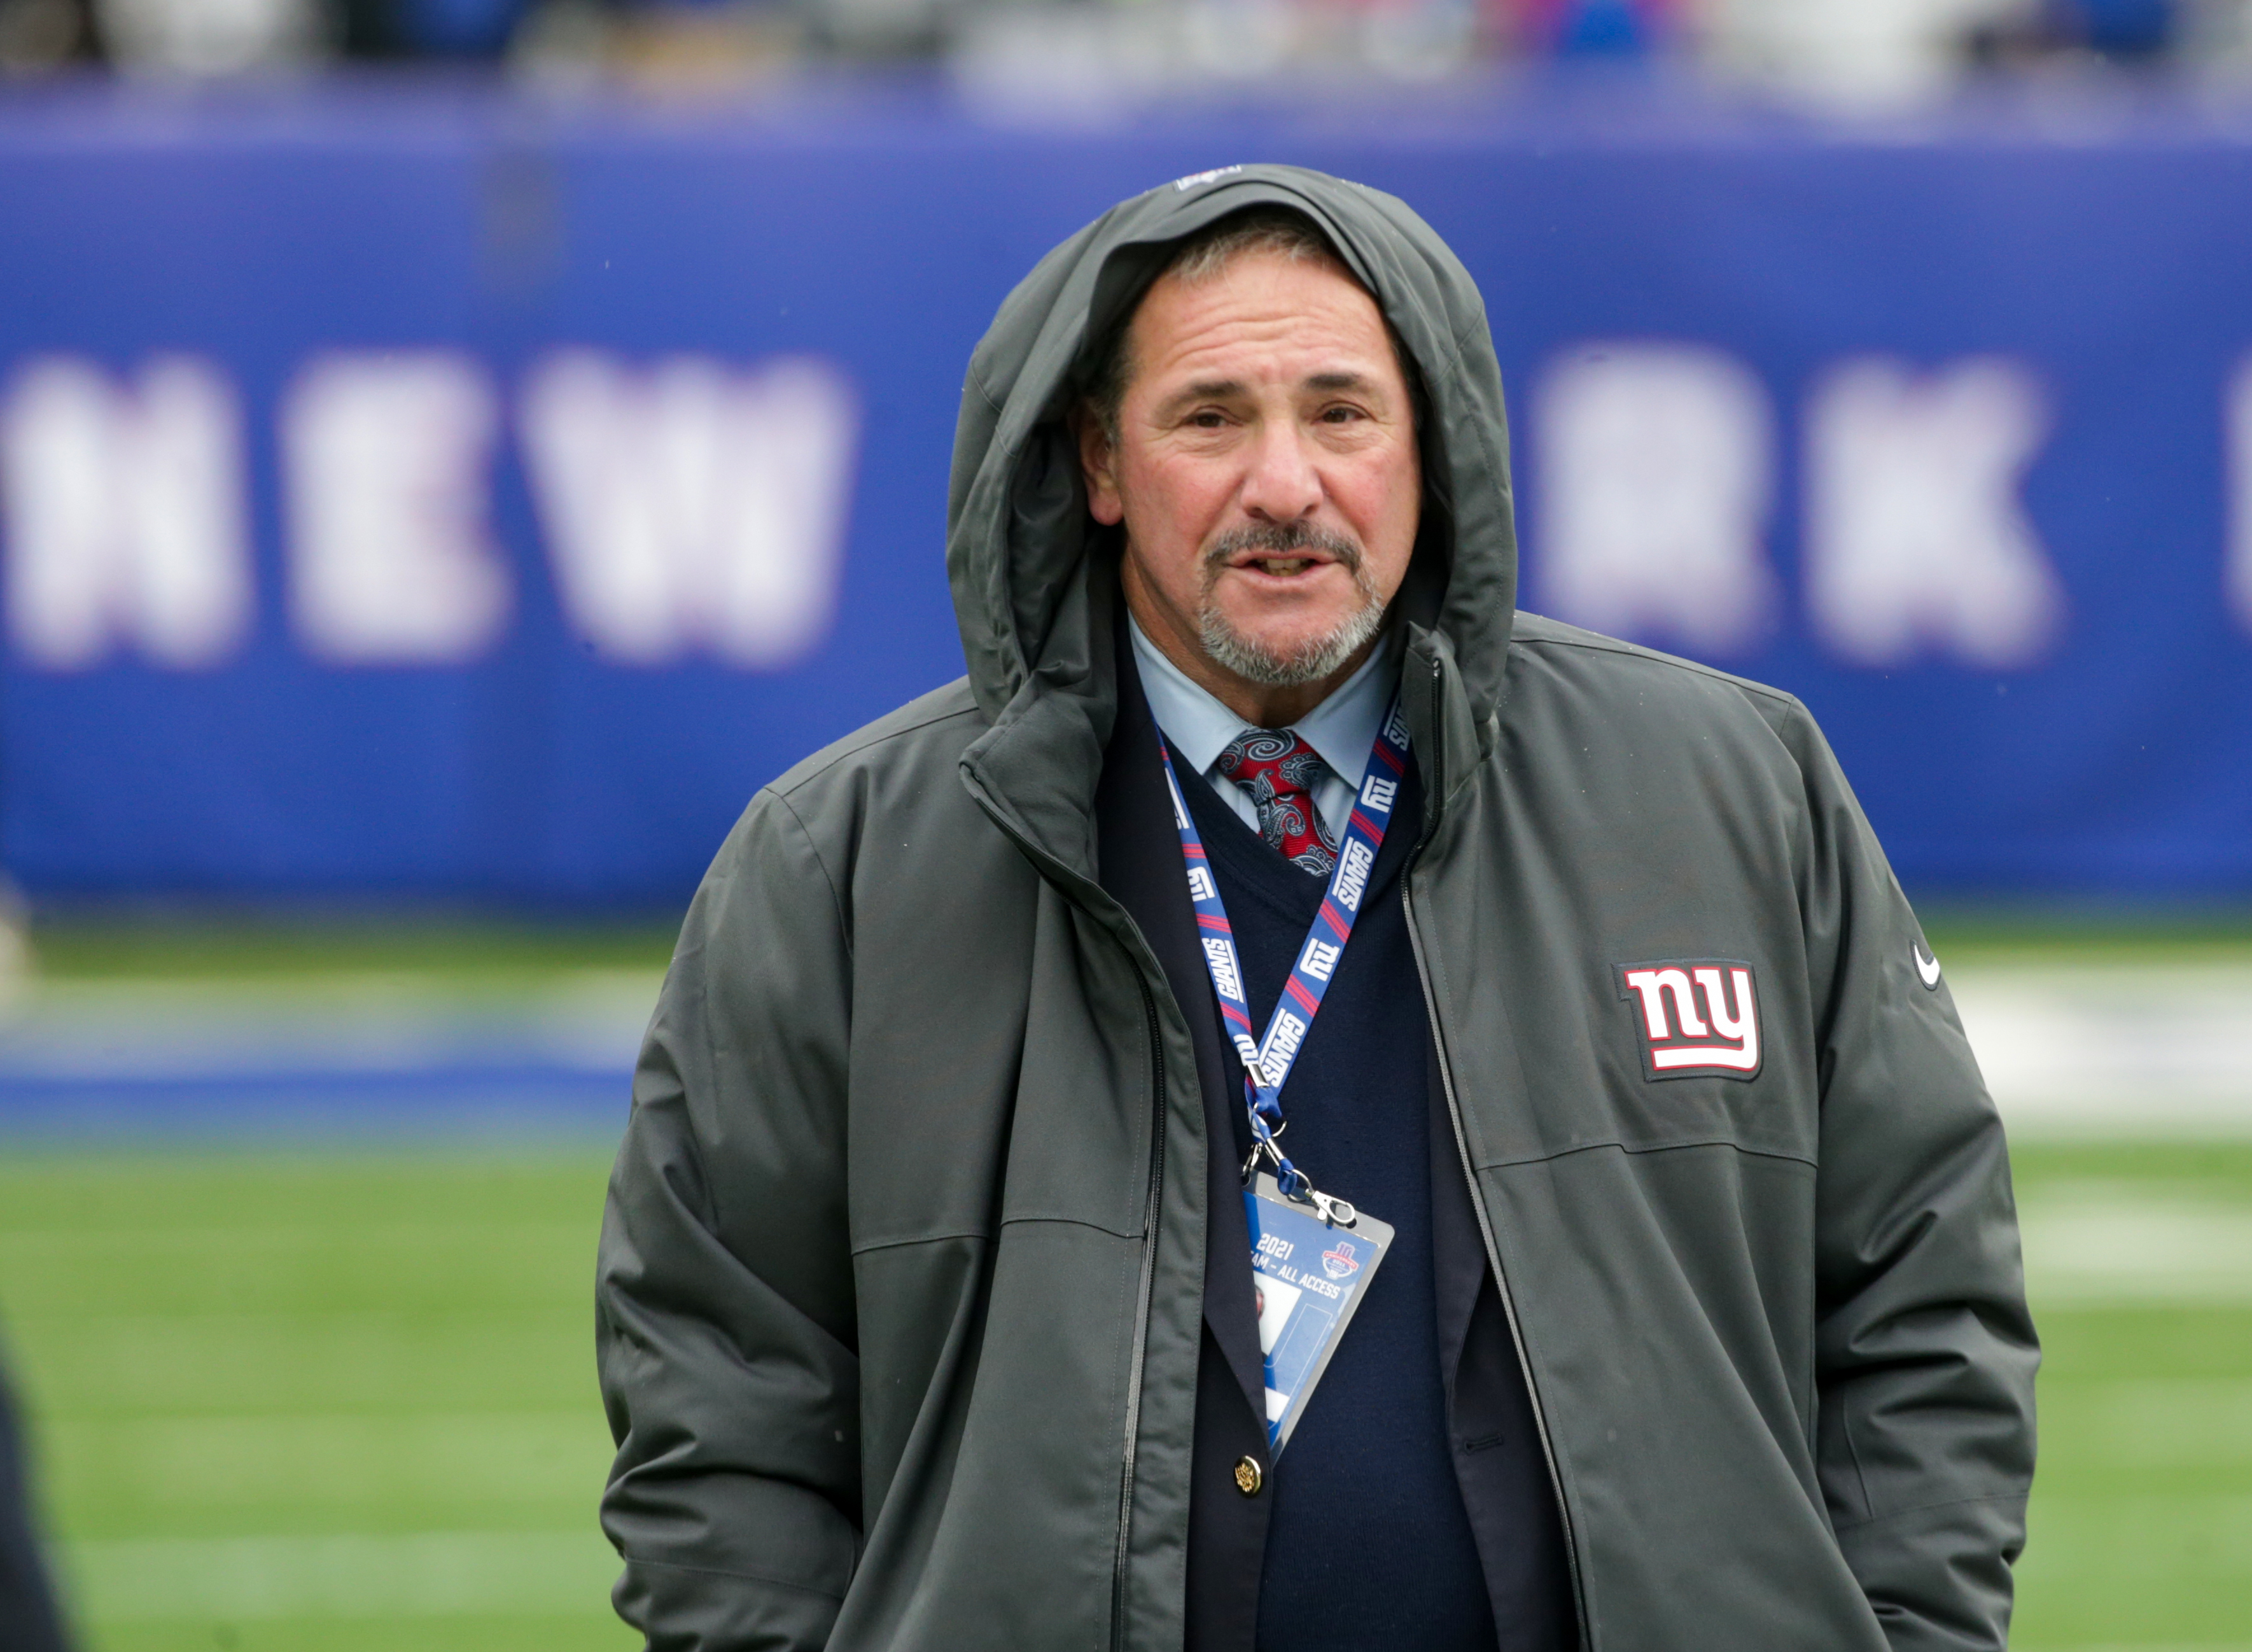 New York Giants Dave Gettleman during pregame warmups as the Giants prepare to host the Washington Football Team on Sunday, Jan. 9, 2022 in East Rutherford, N.J.